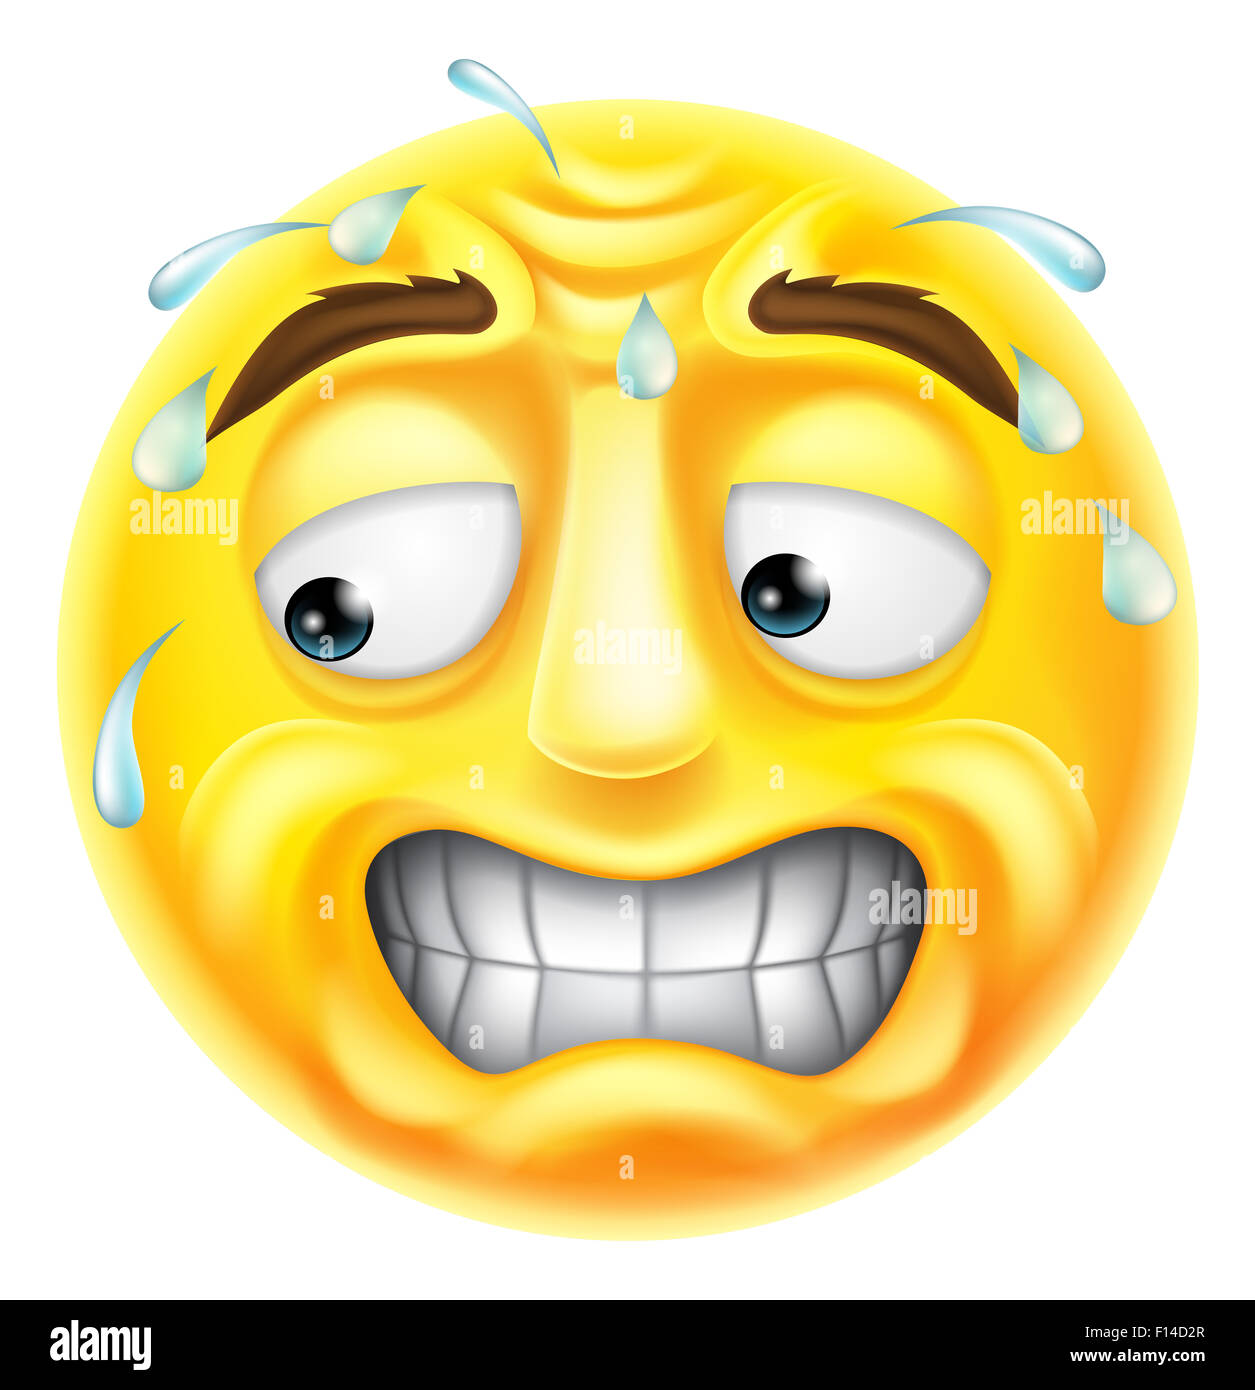 A scared, worried or embarrassed looking emji emoticon character Stock Photo